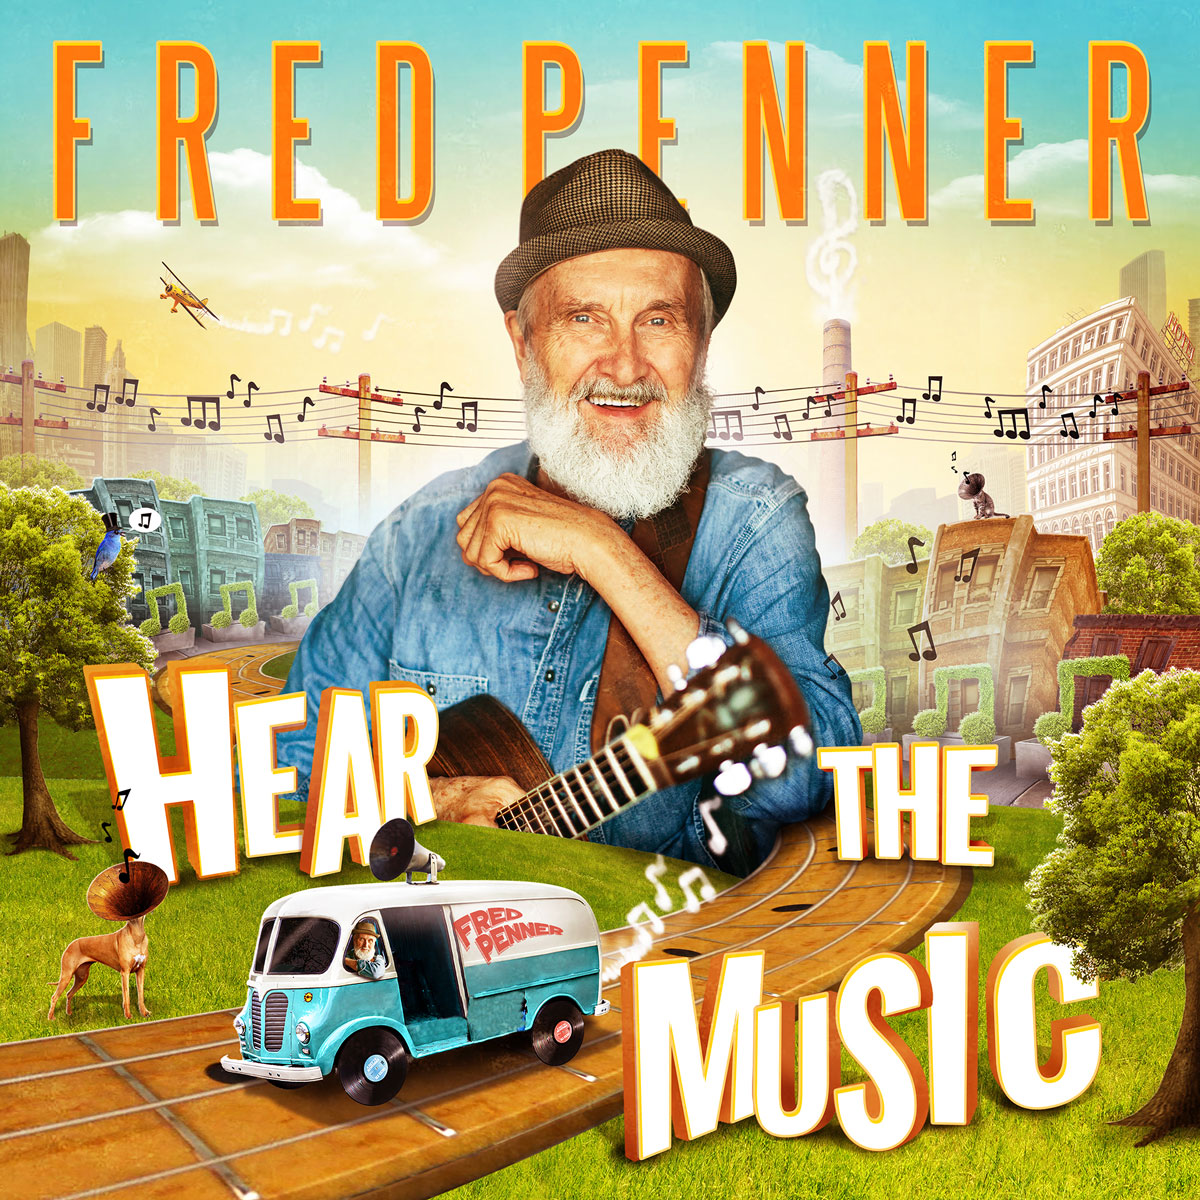 Fred Penner’s new album is here